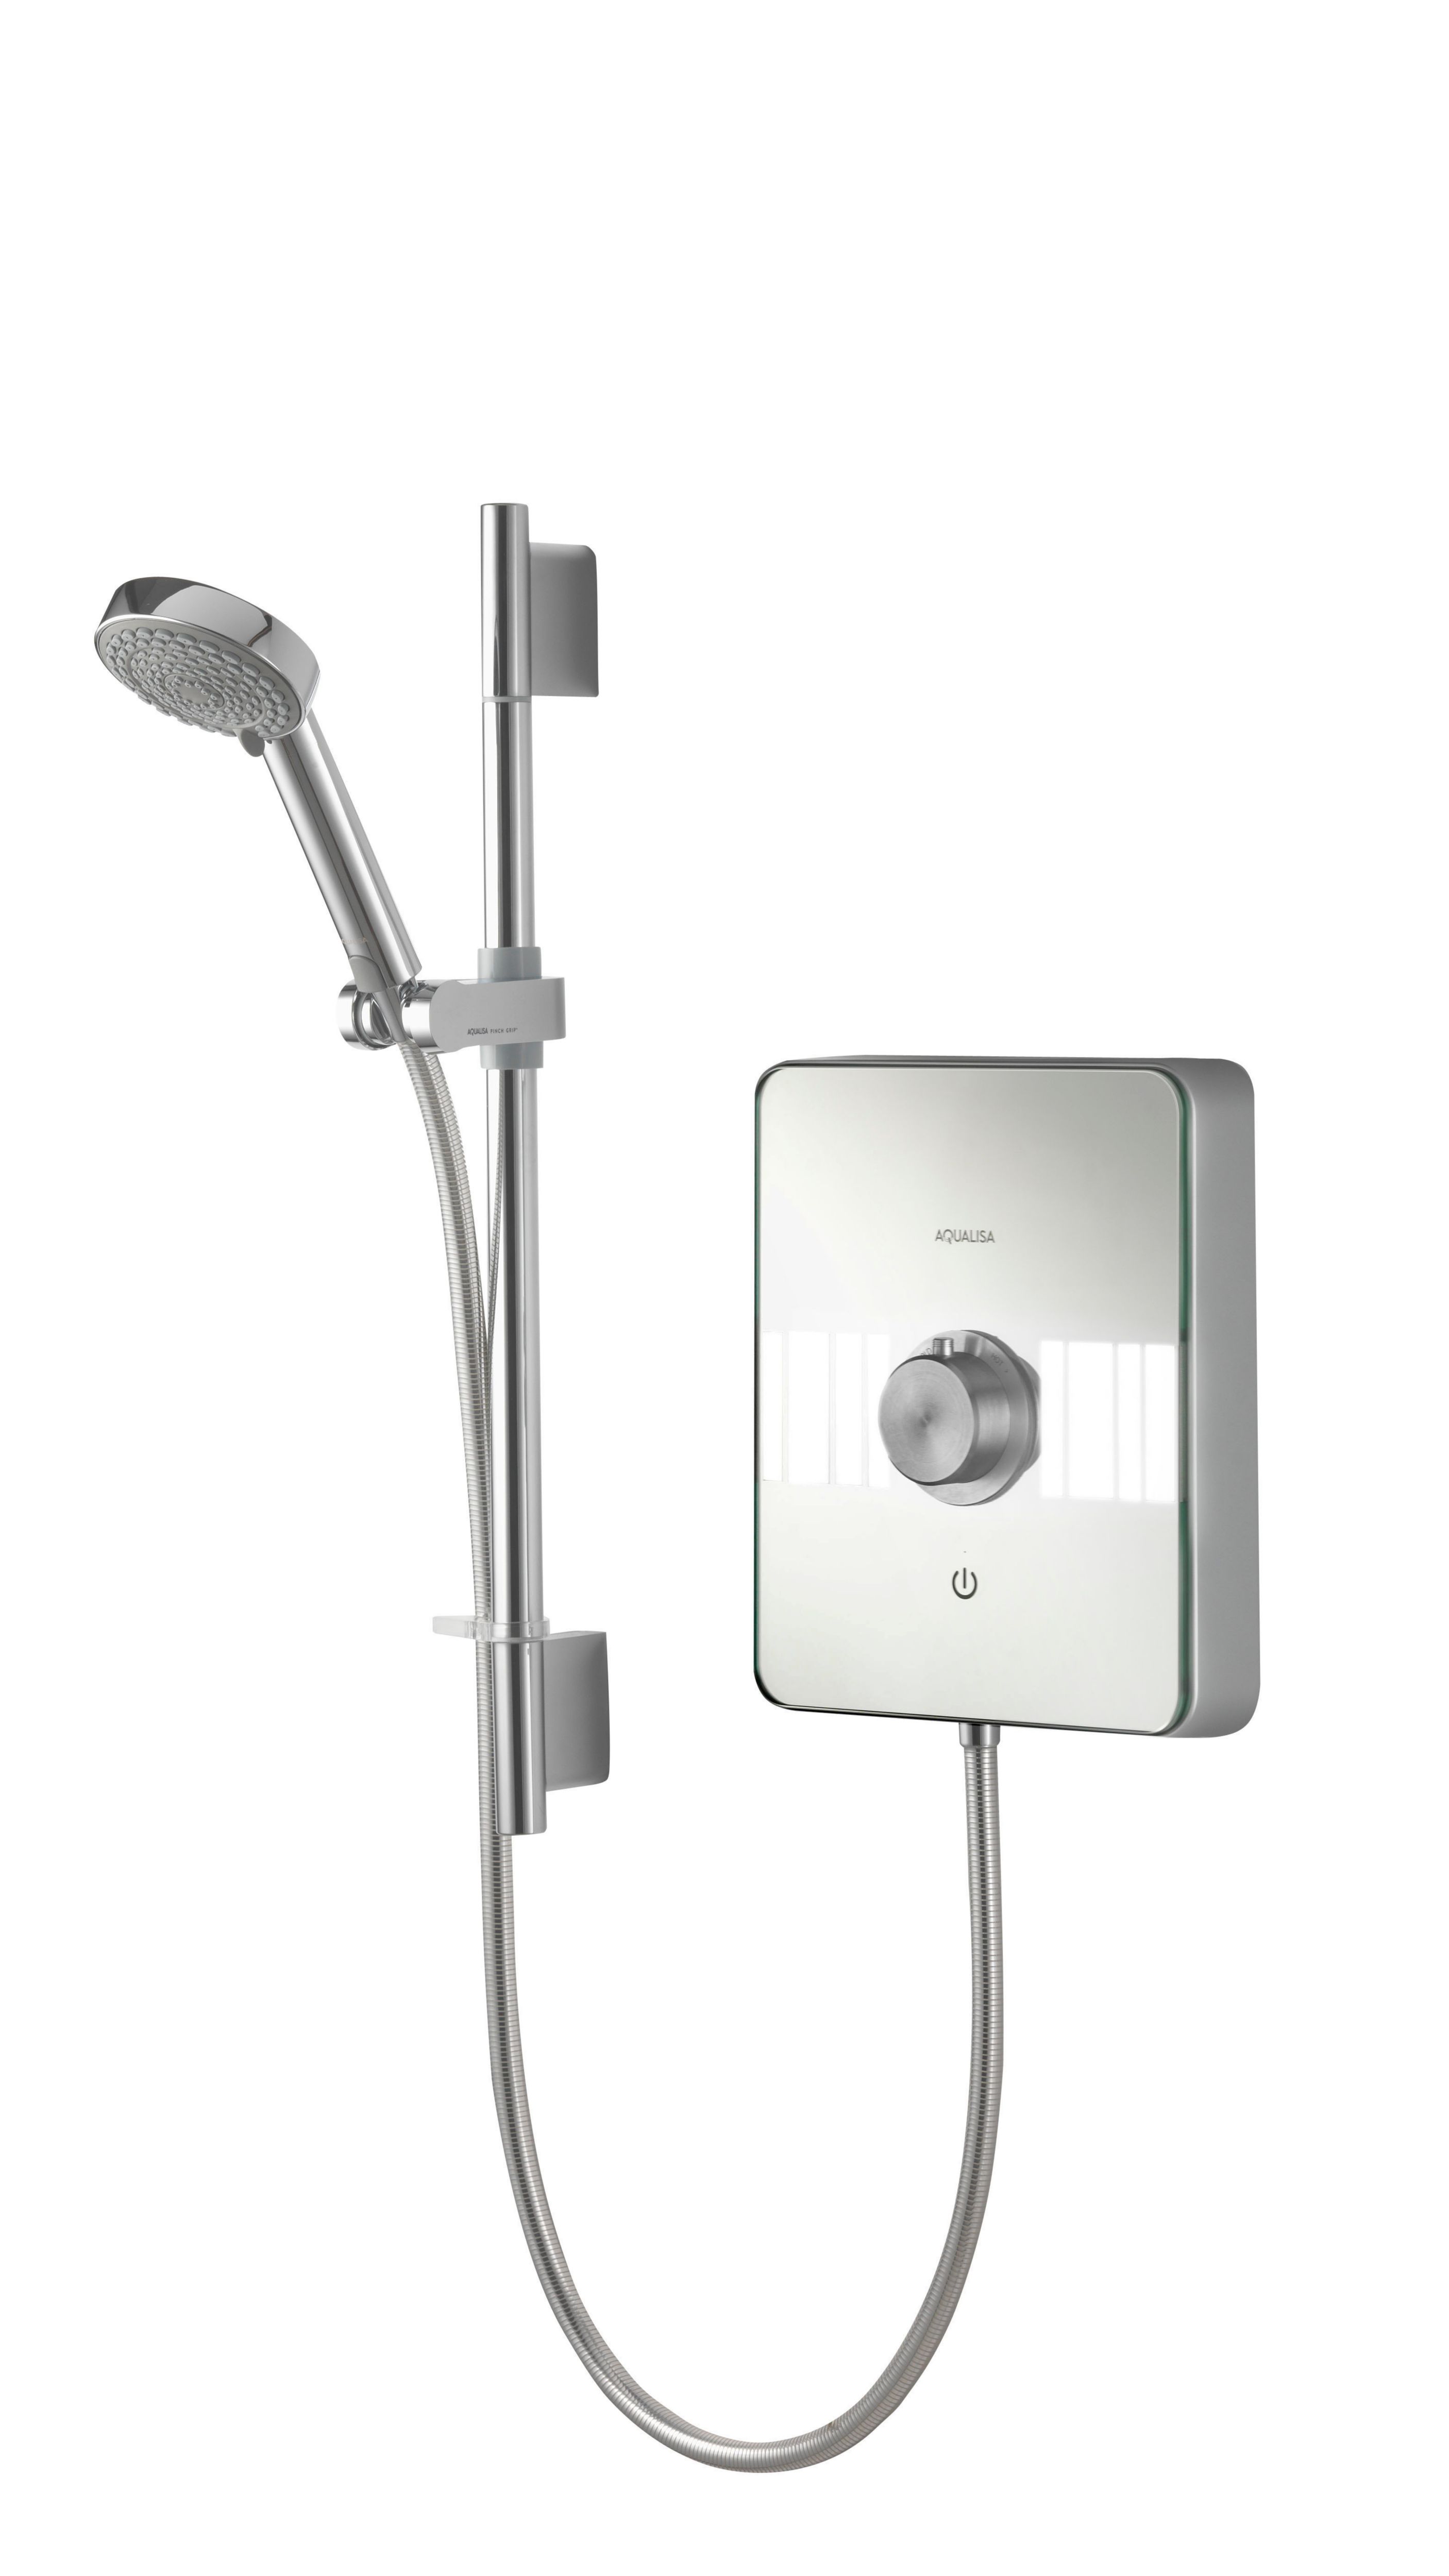 Aqualisa Lumi Electric 9.5kw Electric Shower with Adjustable Head Chrome